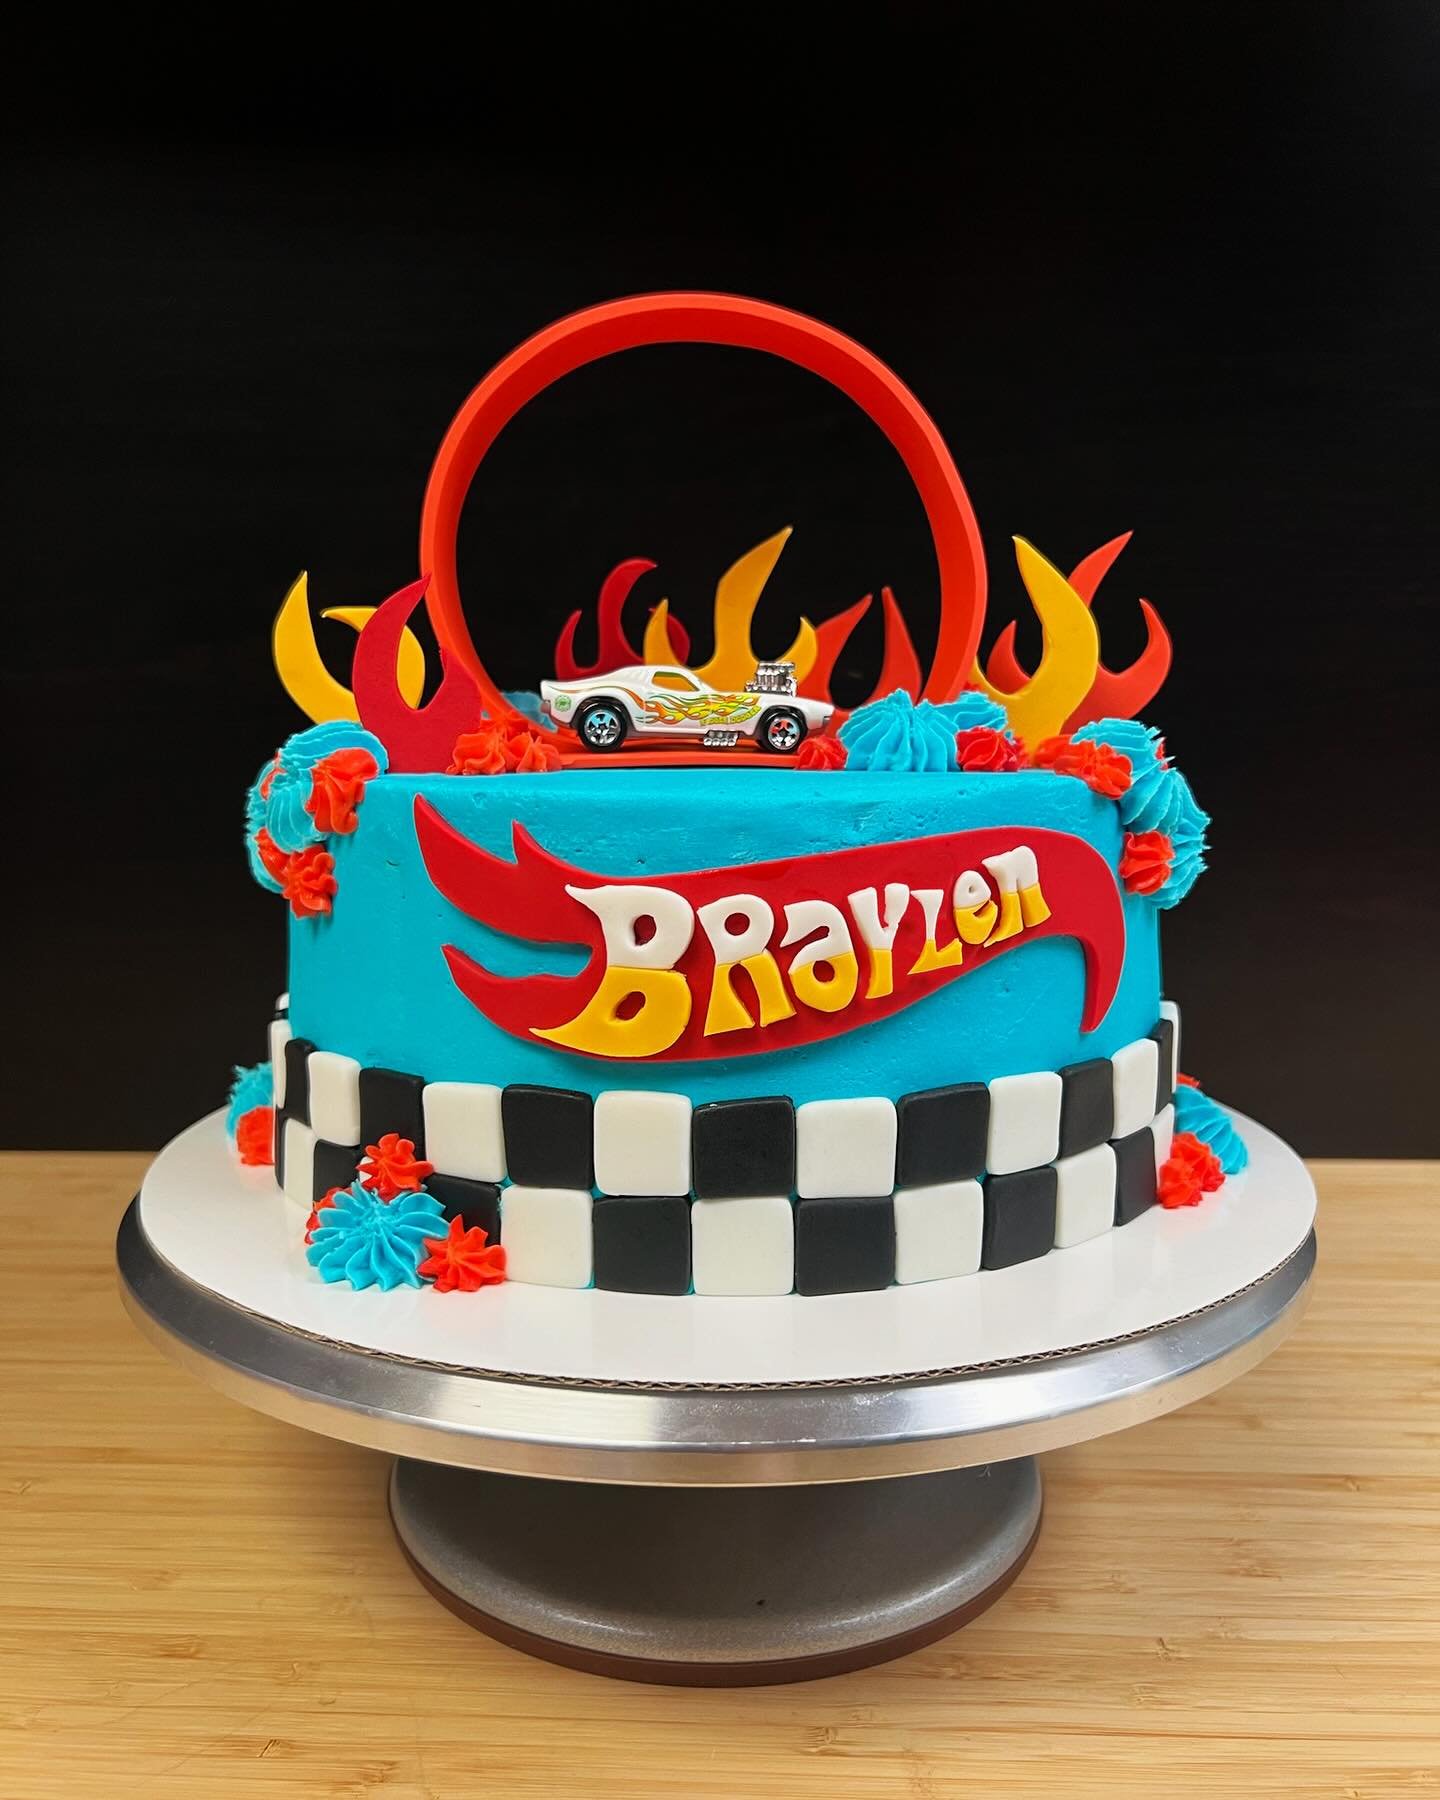 Hot Wheels Wednesday comin&rsquo; in hot! We had sooooo much fun making totally rad cake. Who doesn&rsquo;t love Hot Wheels?! 
Message us for all of your cake and cupcakes needs!

 #johnsonvillecakes #cakesofwacotexas #cakesofmcgregortexas #cakesofwa